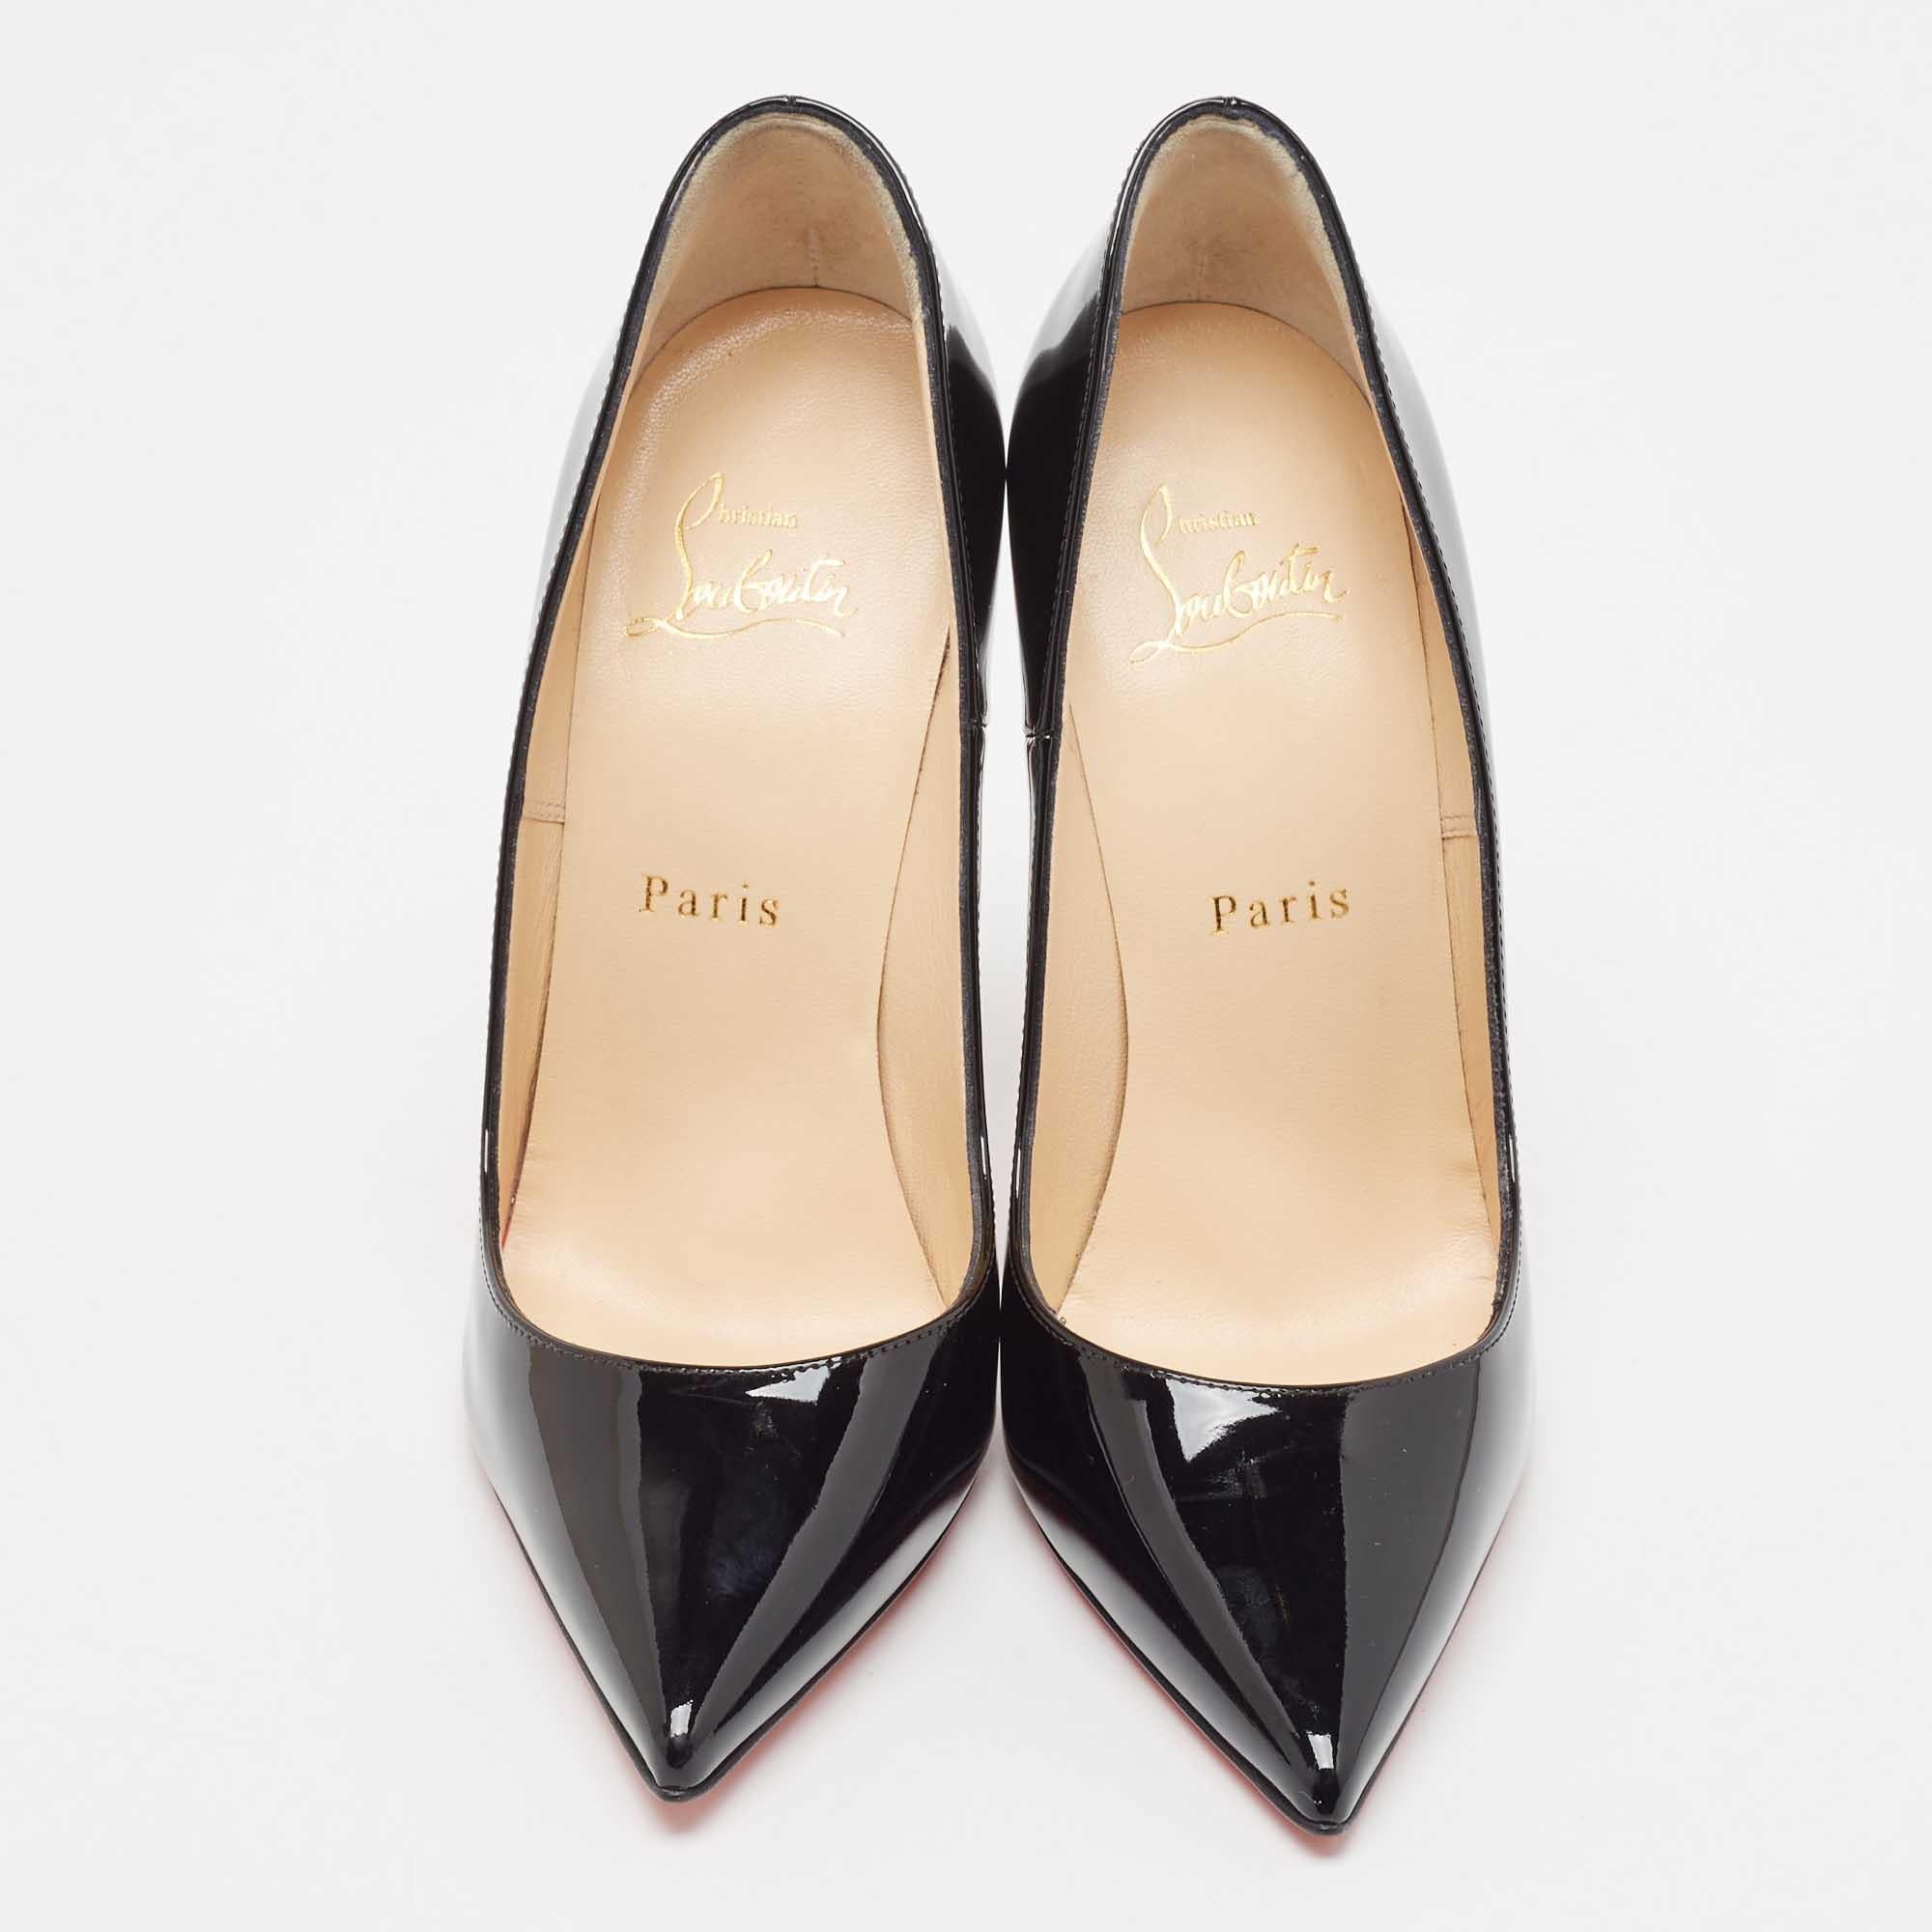 Named after English model Kate Moss, this pair of Christian Louboutin So Kate pumps reflects elegance and sophistication in every step. Proving the brand's expertise in the art of stiletto making, it has been diligently crafted from patent leather